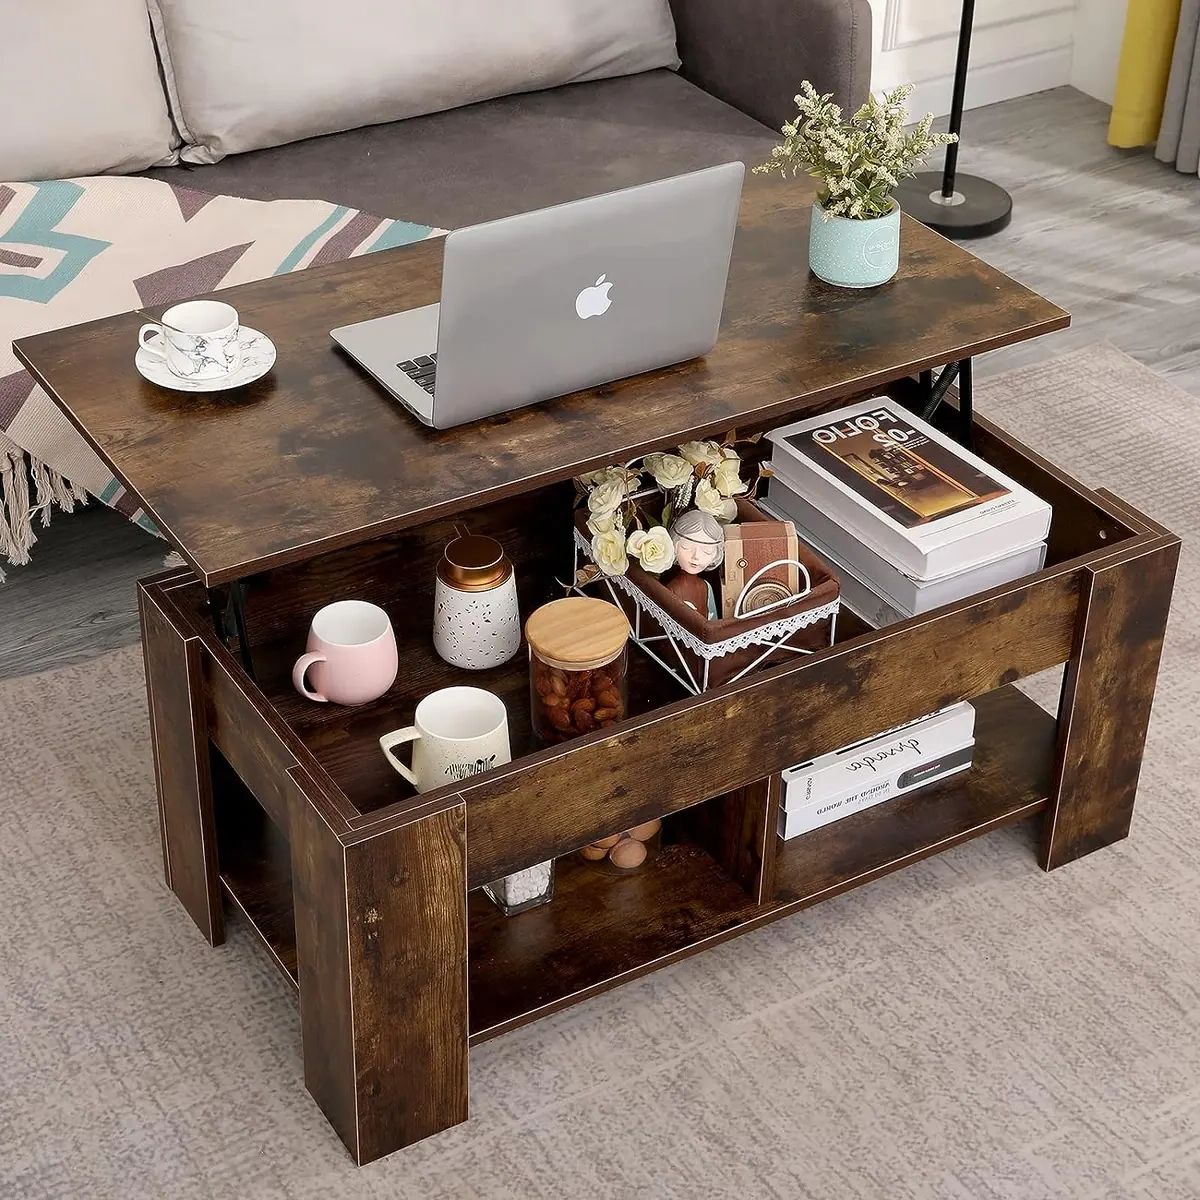 Lift Top Coffee Table With Storage, 2 Open Shelves And Hidden Compartment  Liftin (View 9 of 10)